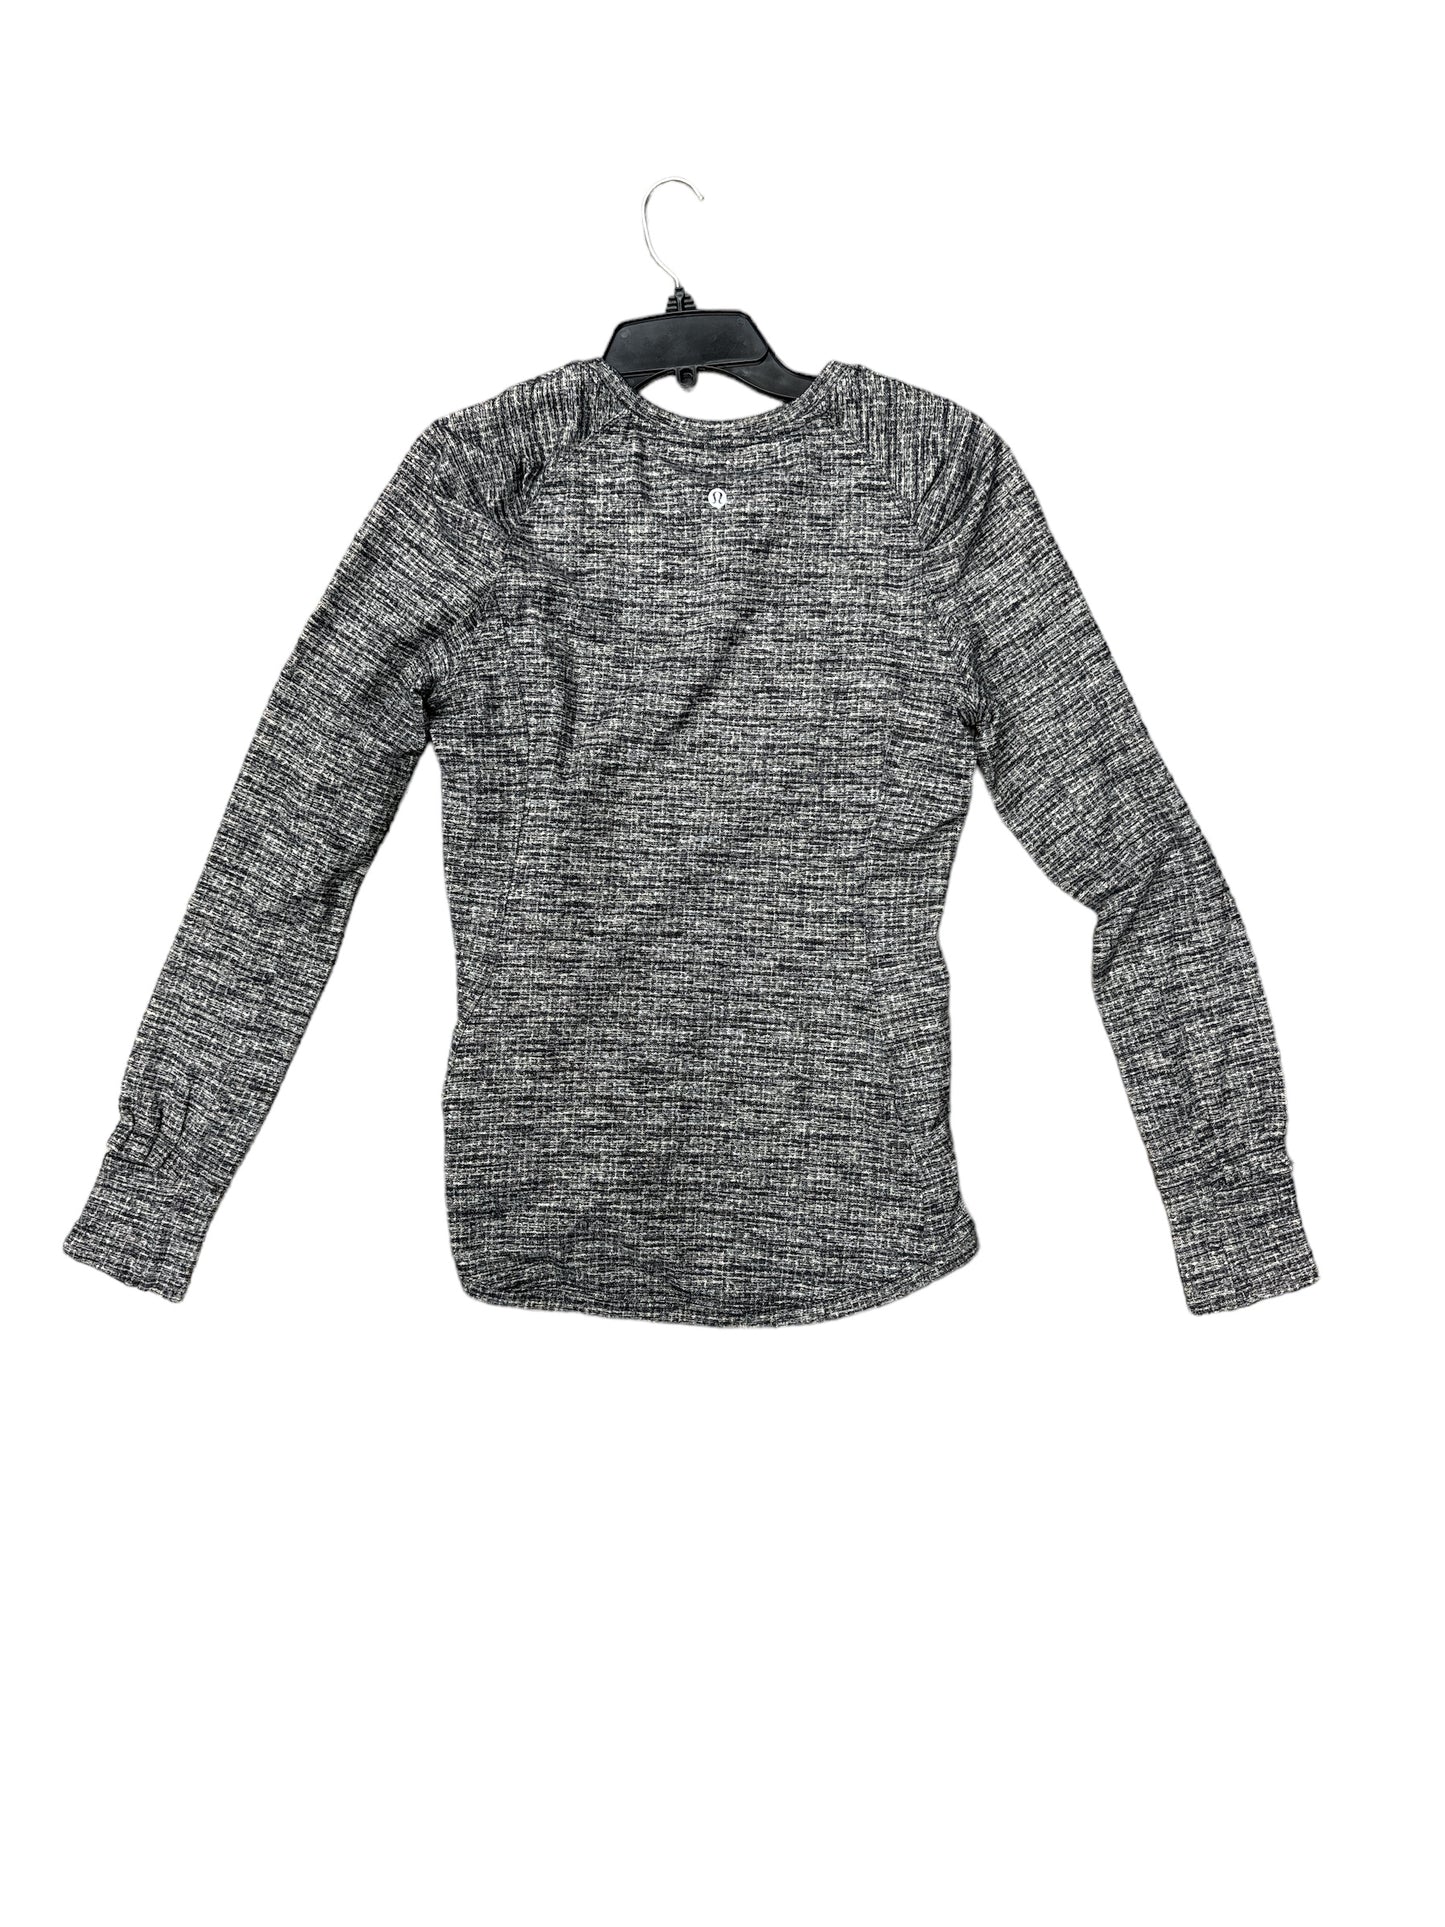 Athletic Top Long Sleeve Collar By Lululemon  Size: M